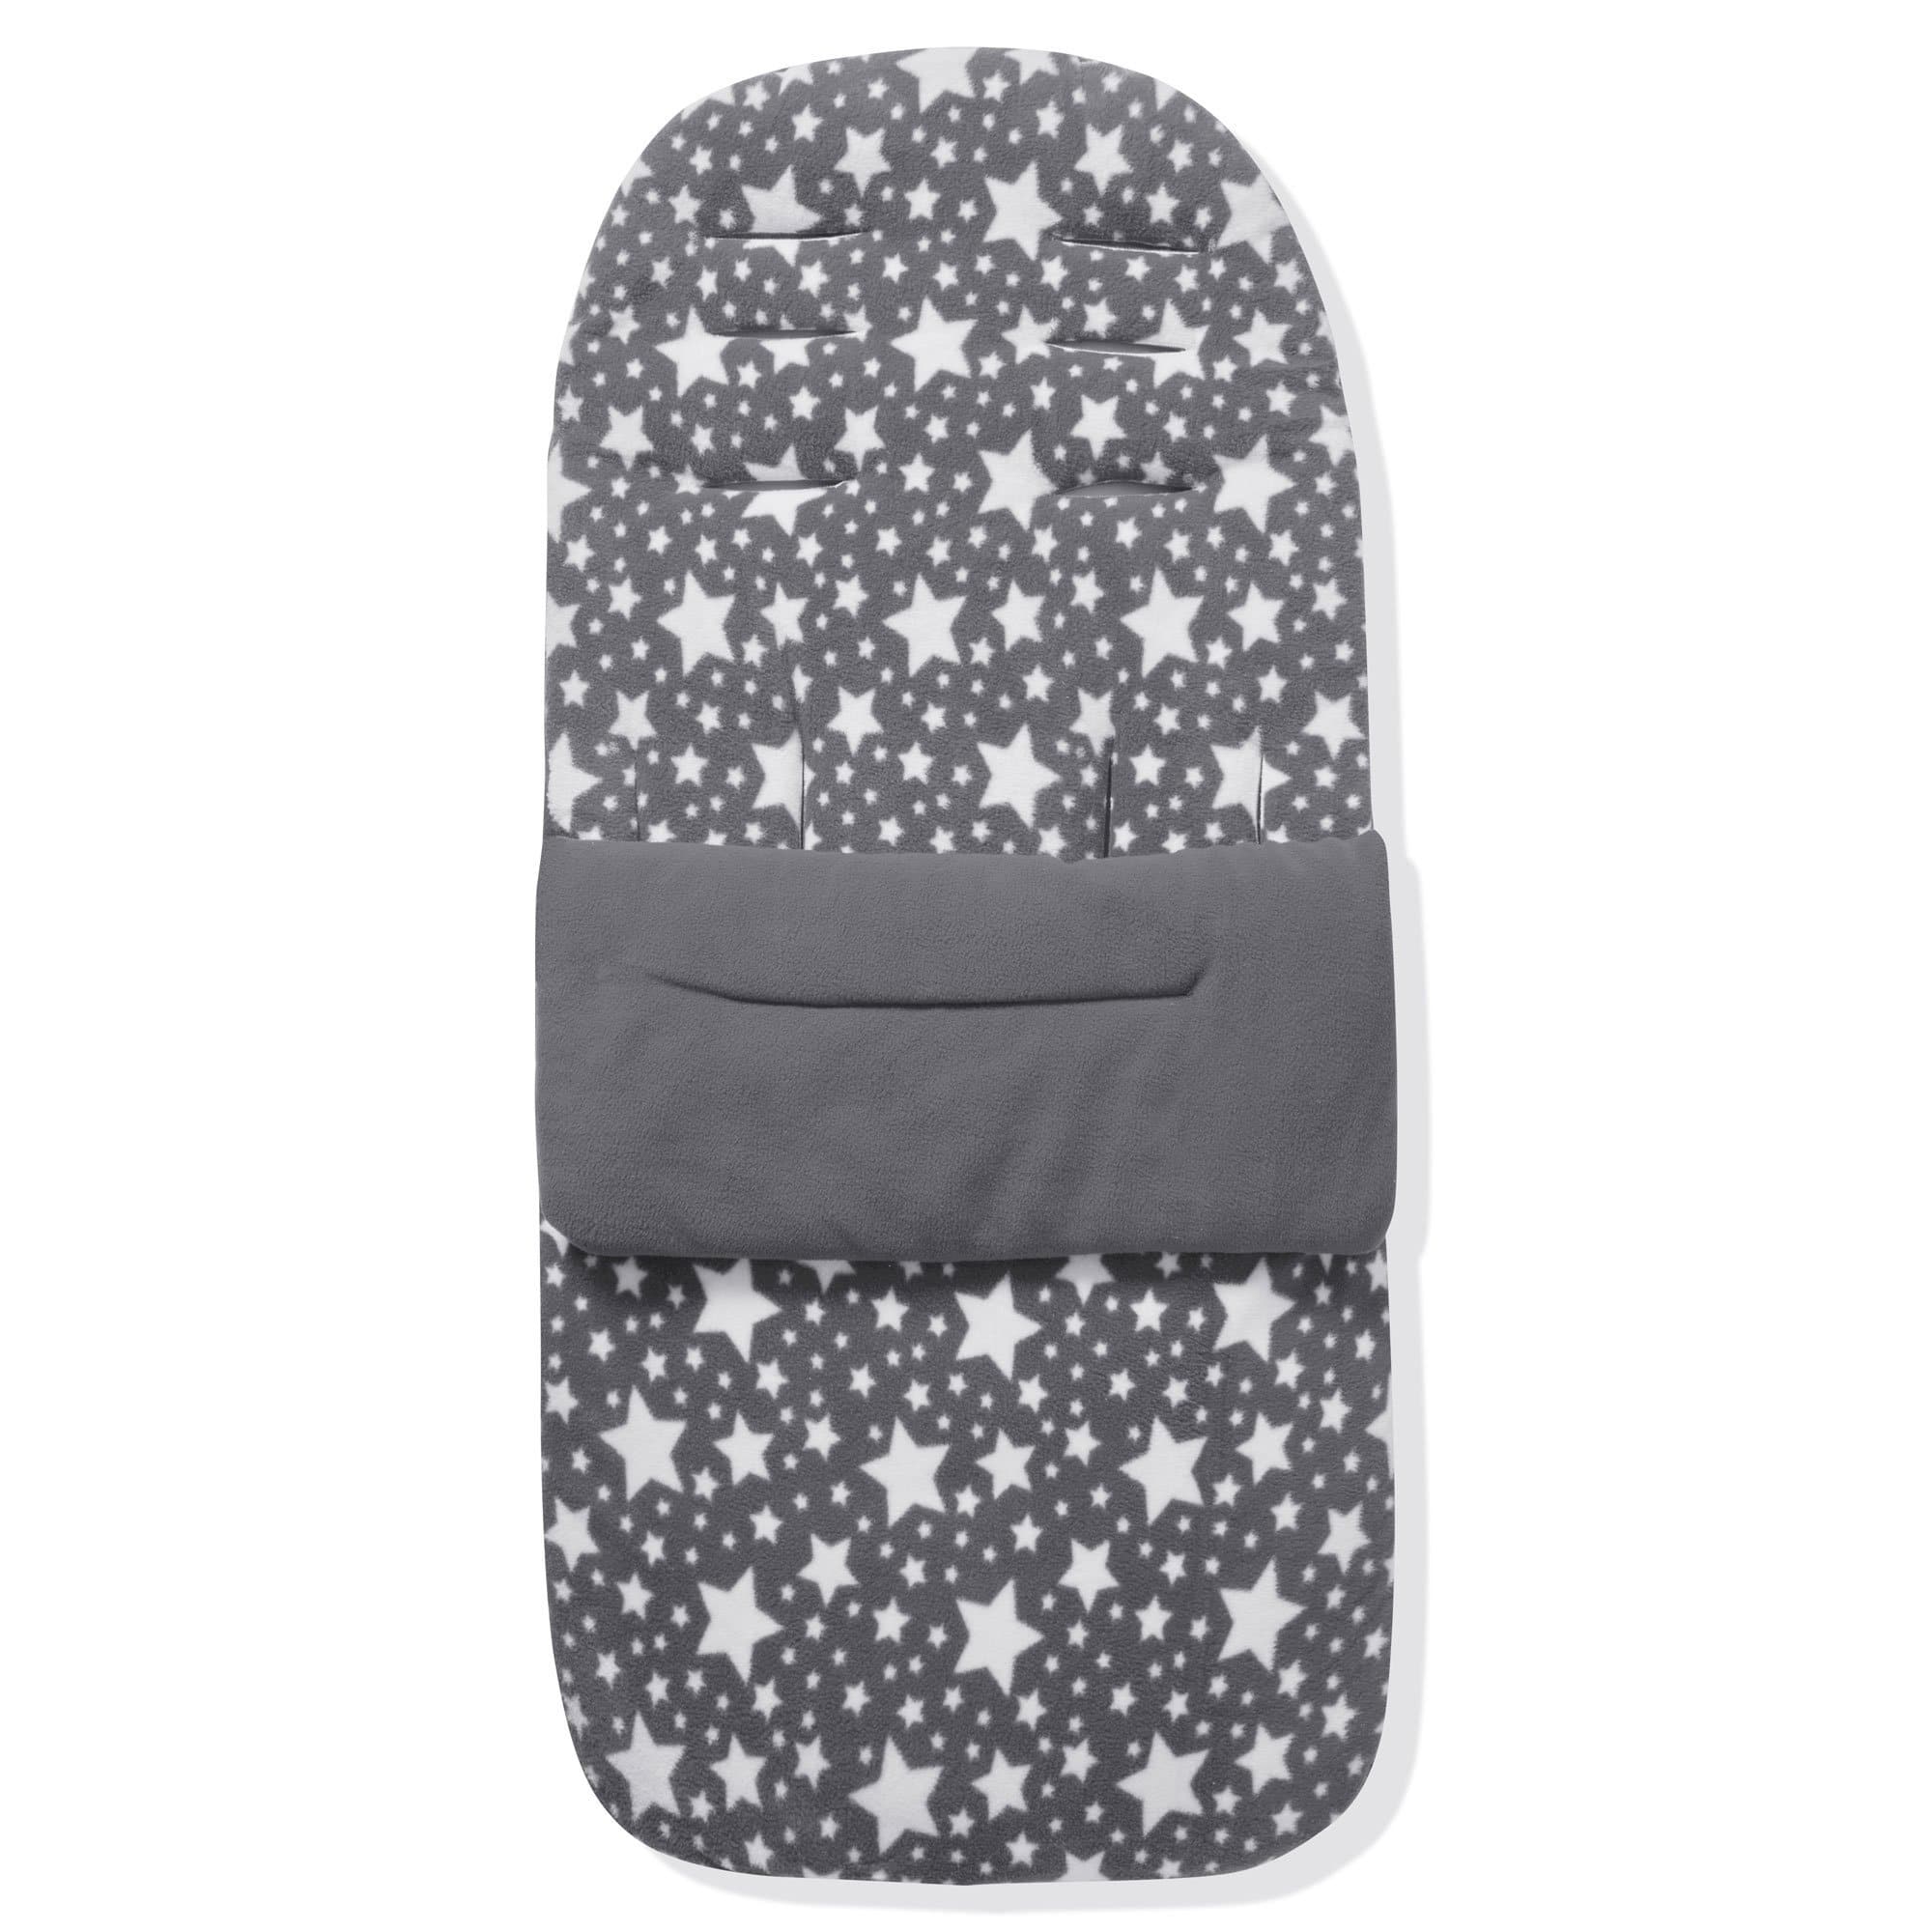 Fleece Footmuff / Cosy Toes Compatible With Concord - For Your Little One